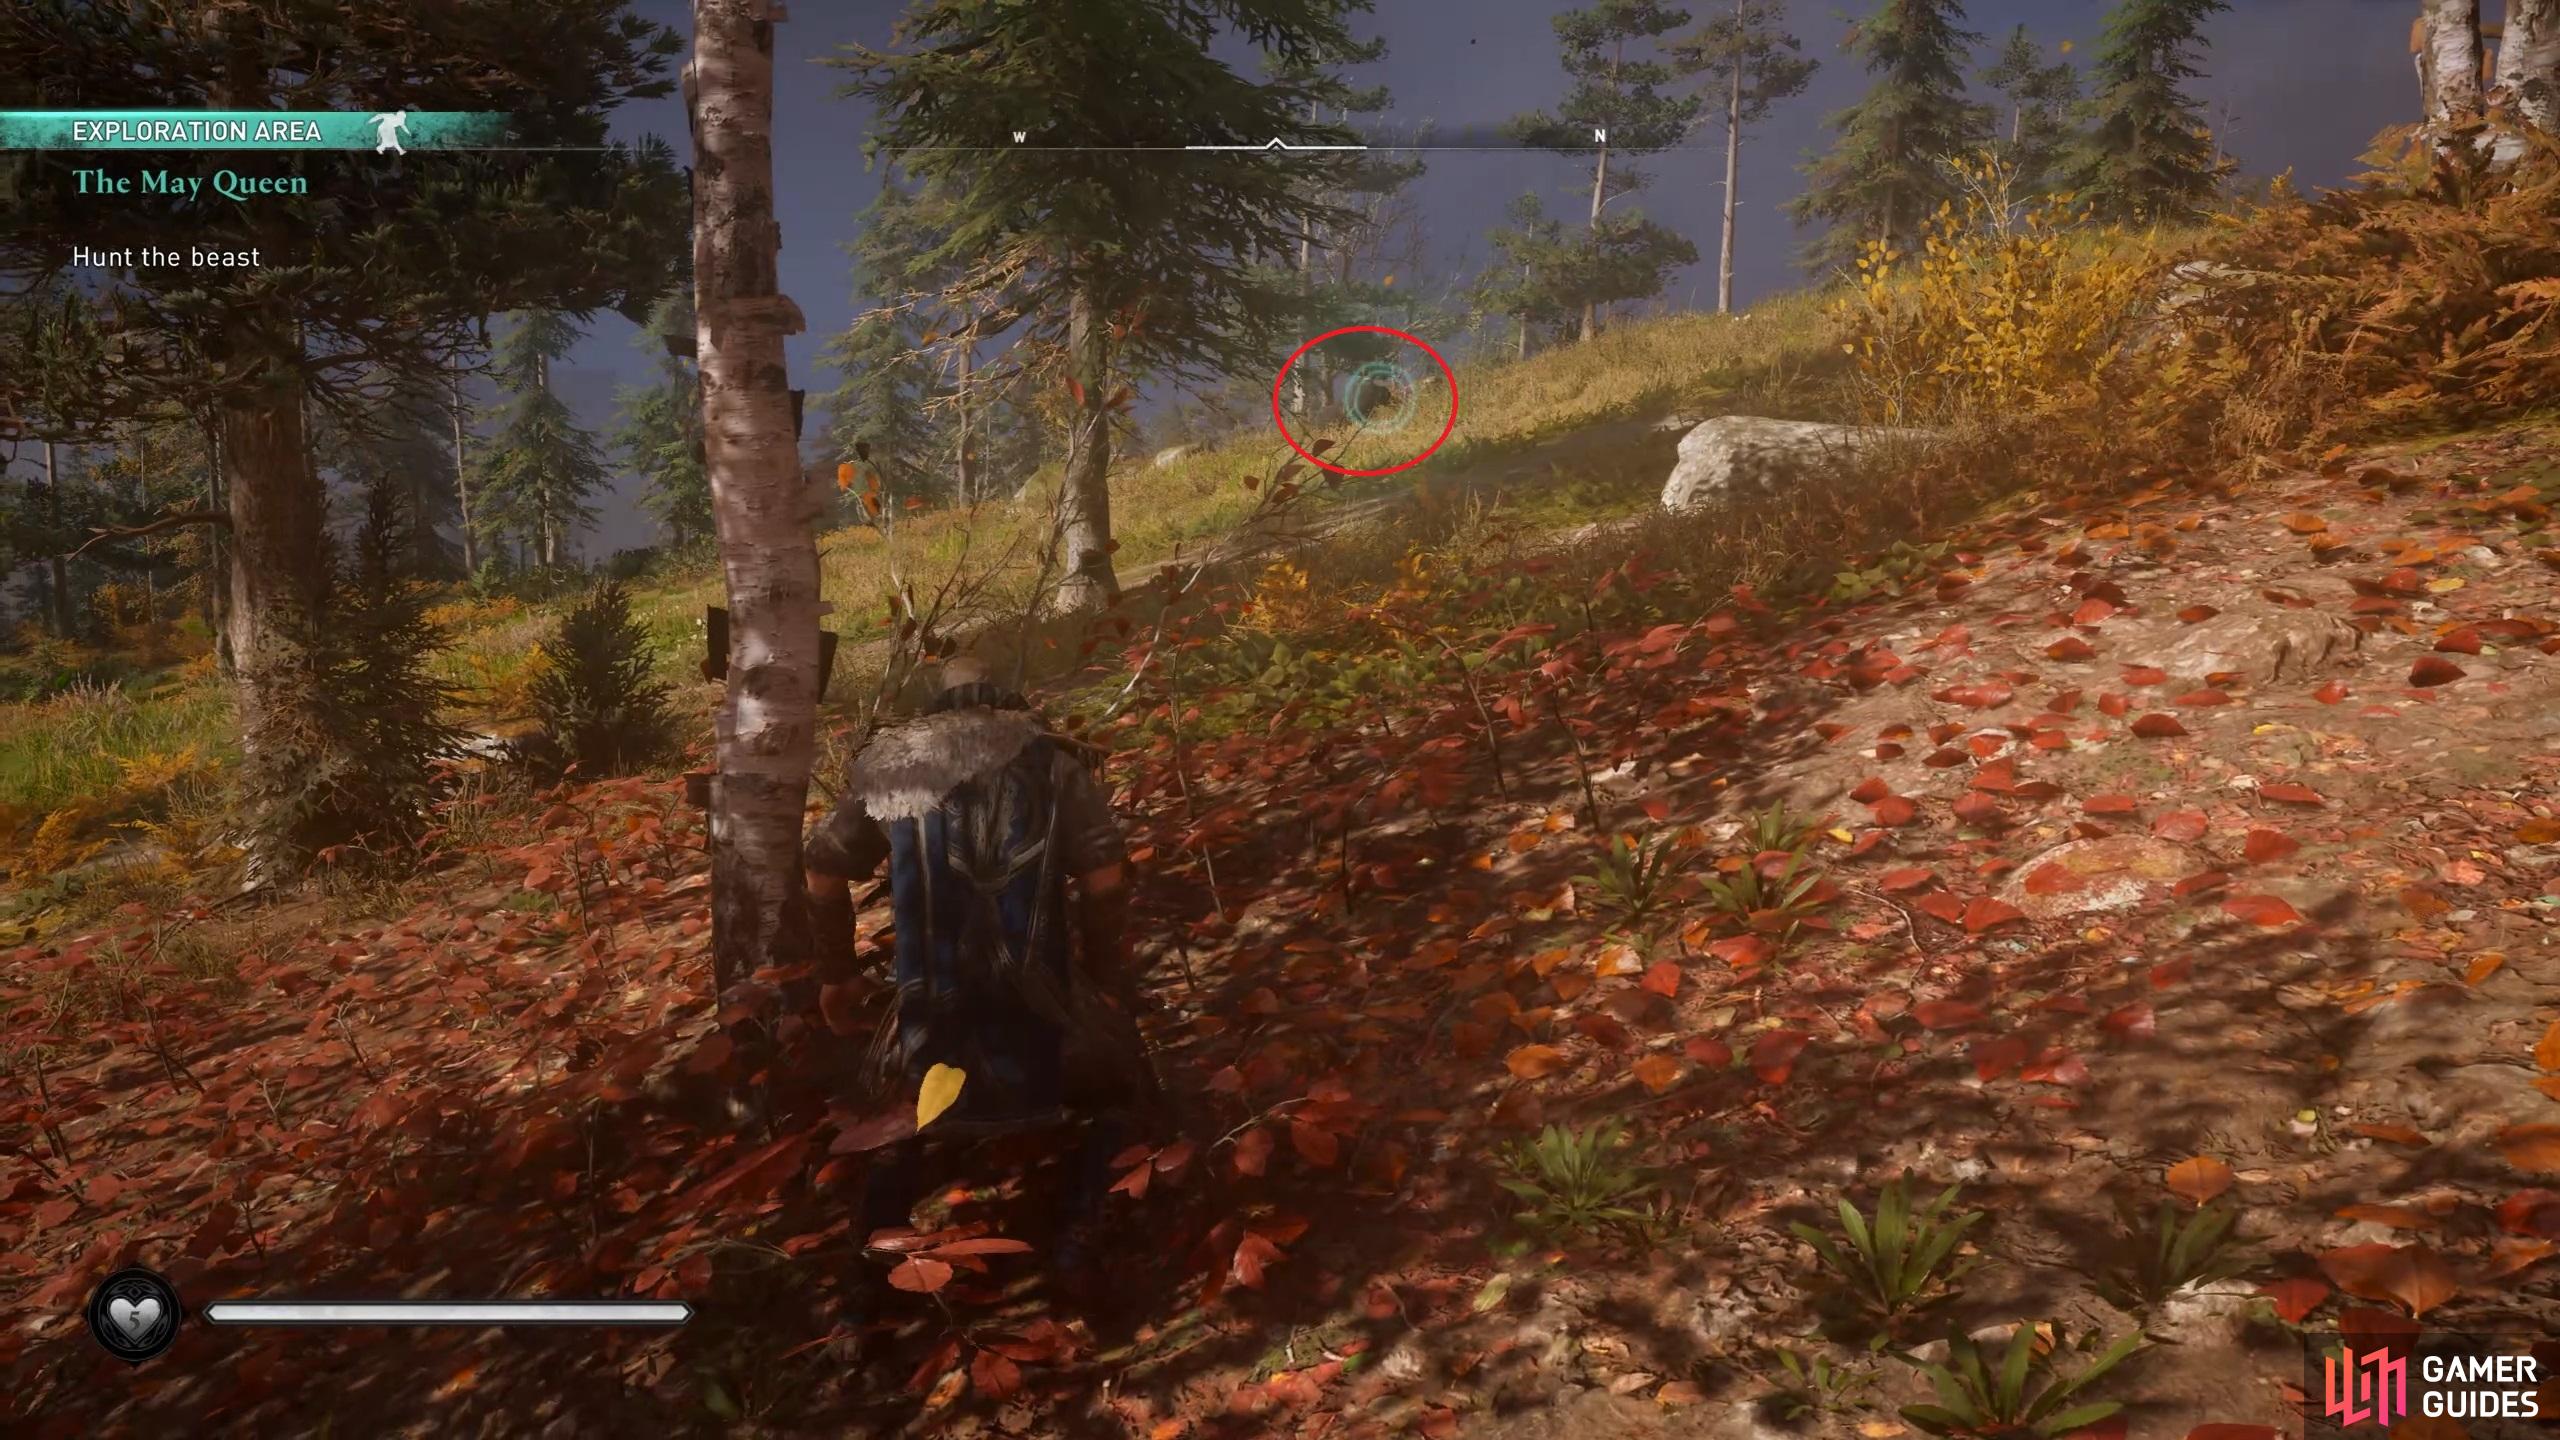 Use Odins Sight to highlight the corpse of the bear in the northwest of the forest.